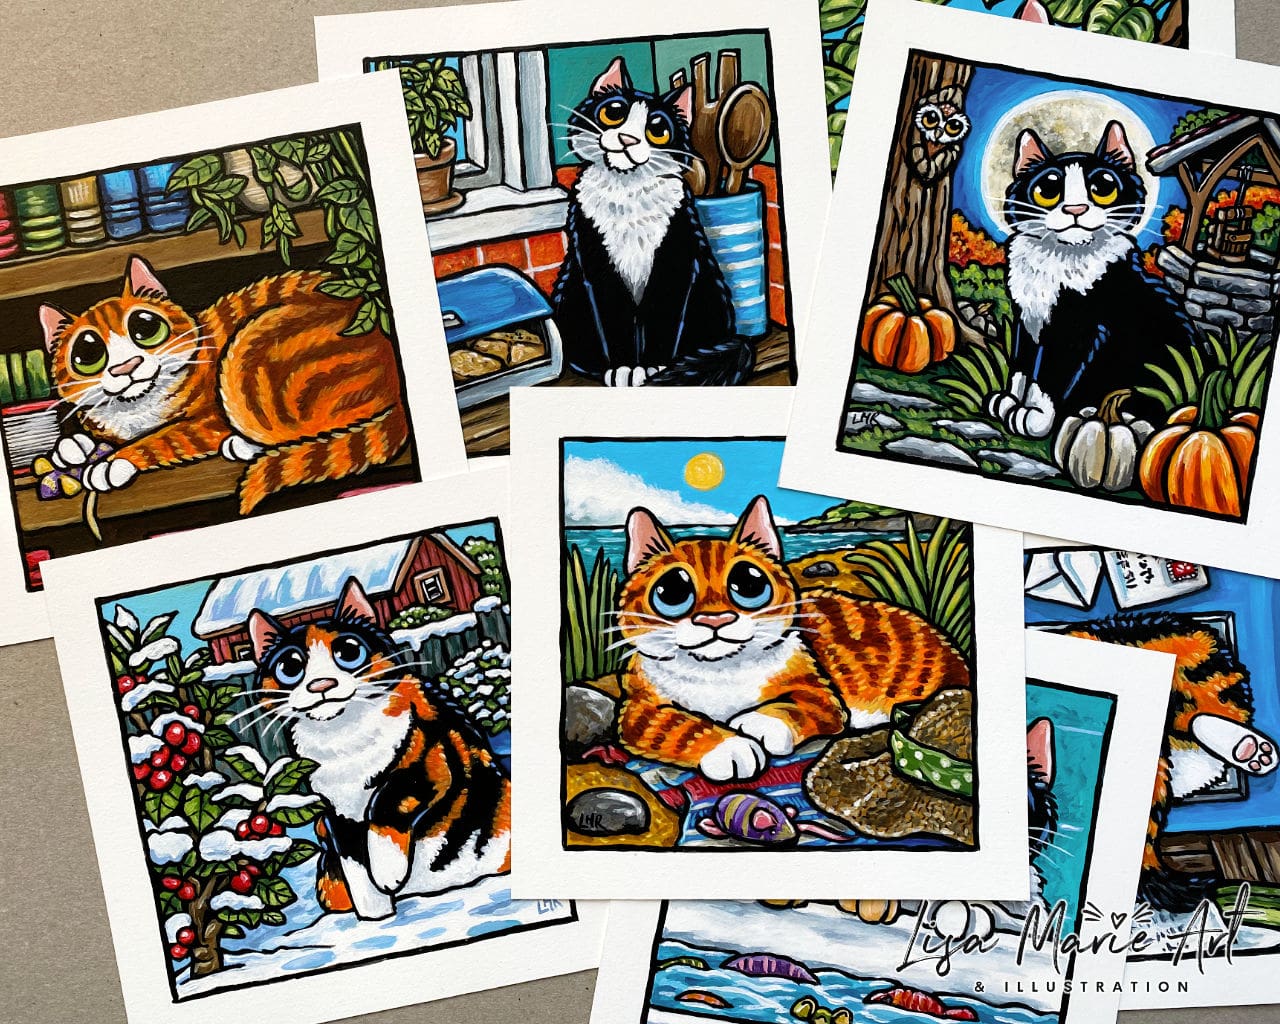 Tabby Cats and Calicos at Whitby Galleries